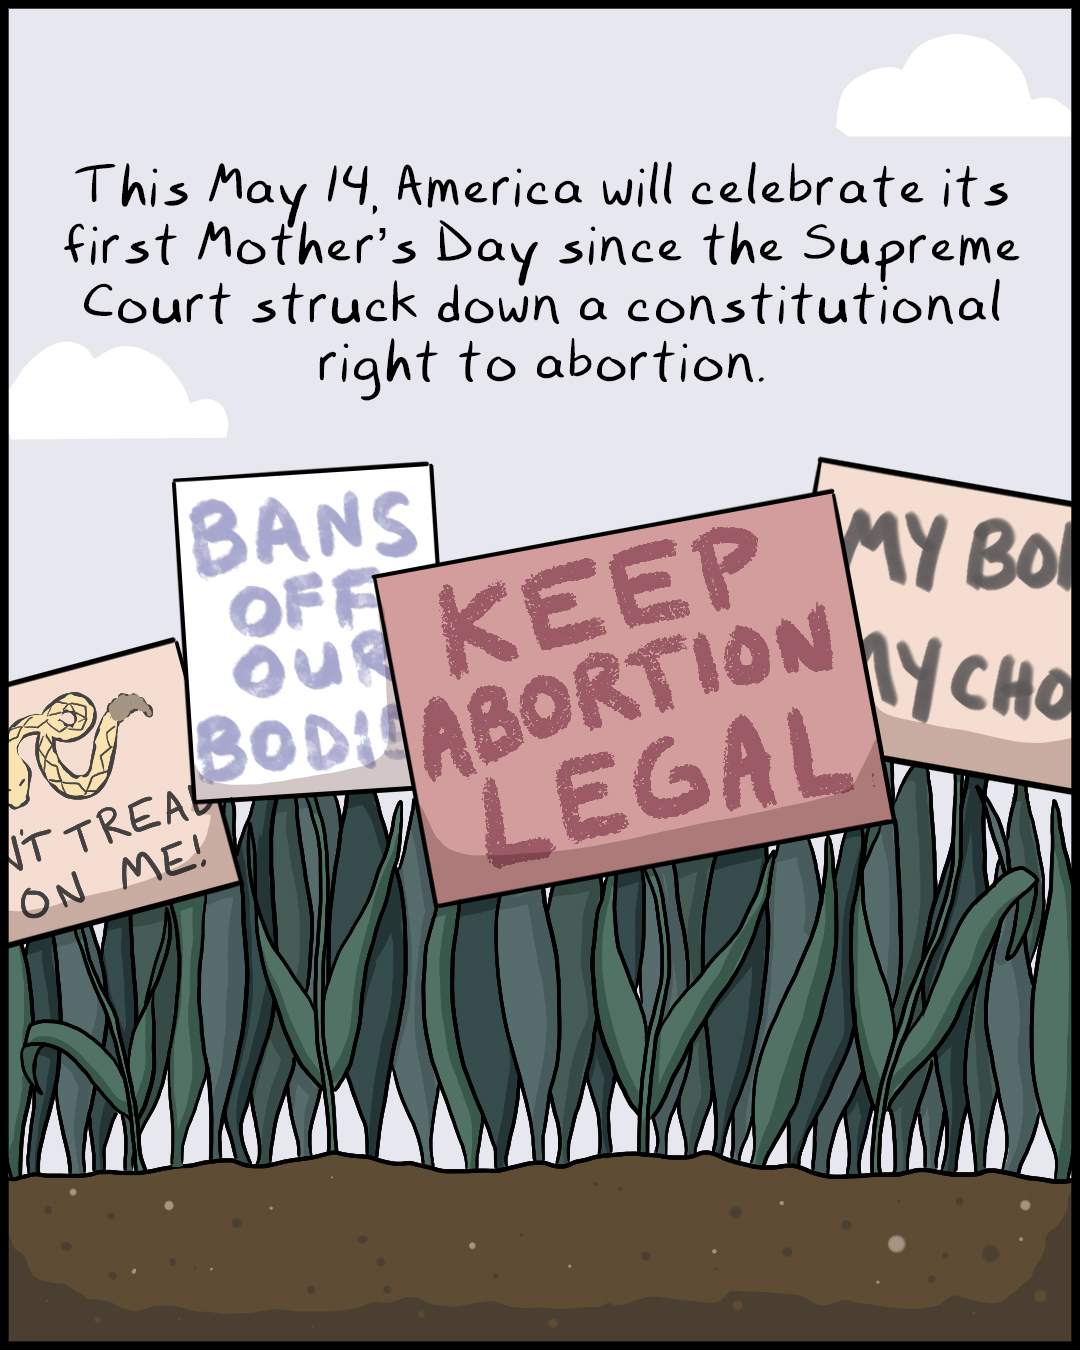 Flowers and Cards Are Nice. I'd Rather Have Bodily Autonomy